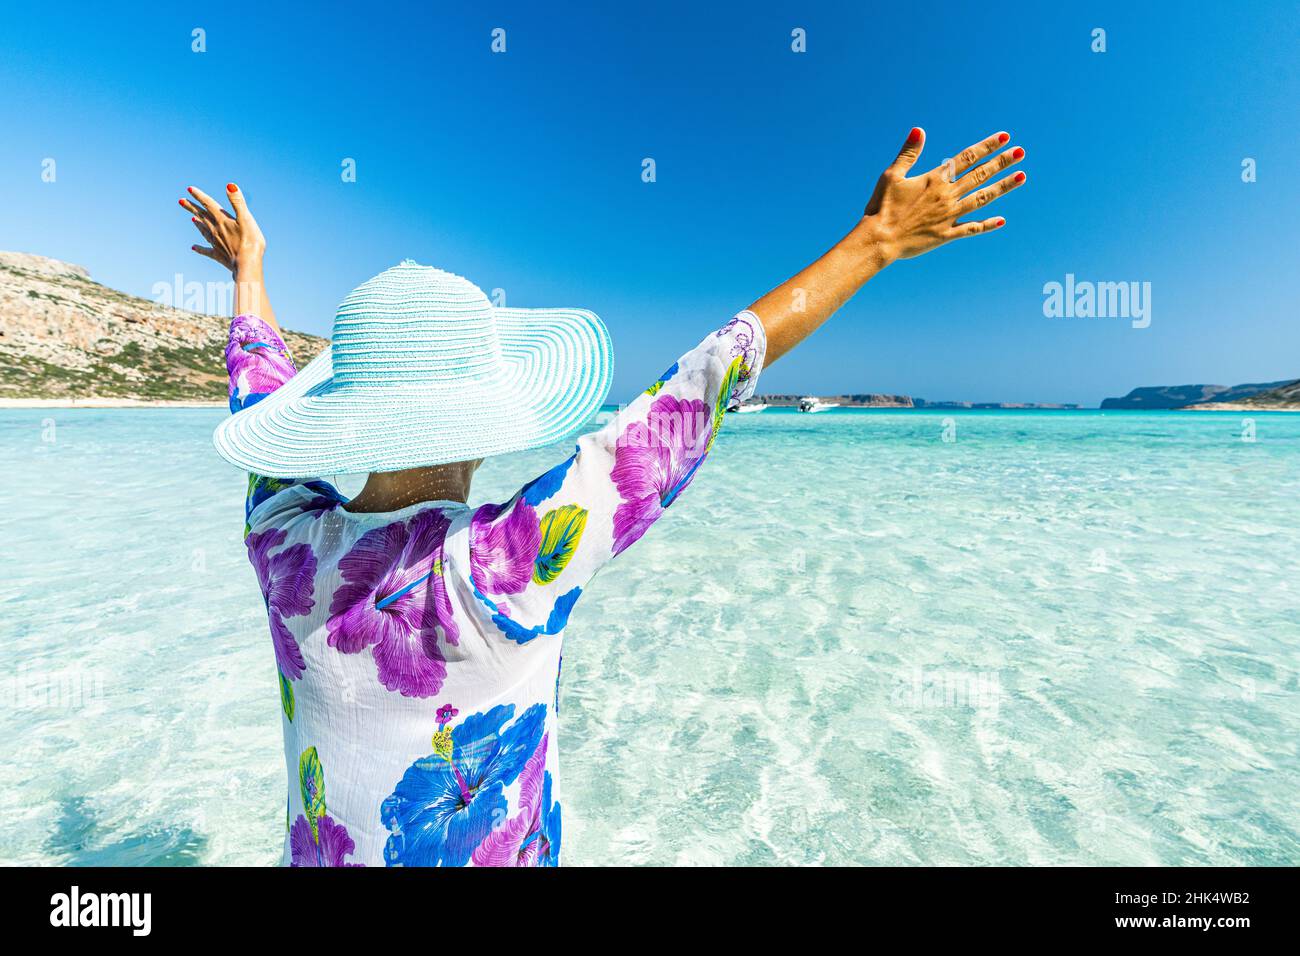 Cheerful woman with arms raised sunbathing in the clear sea, Crete, Greek Islands, Greece, Europe Stock Photo